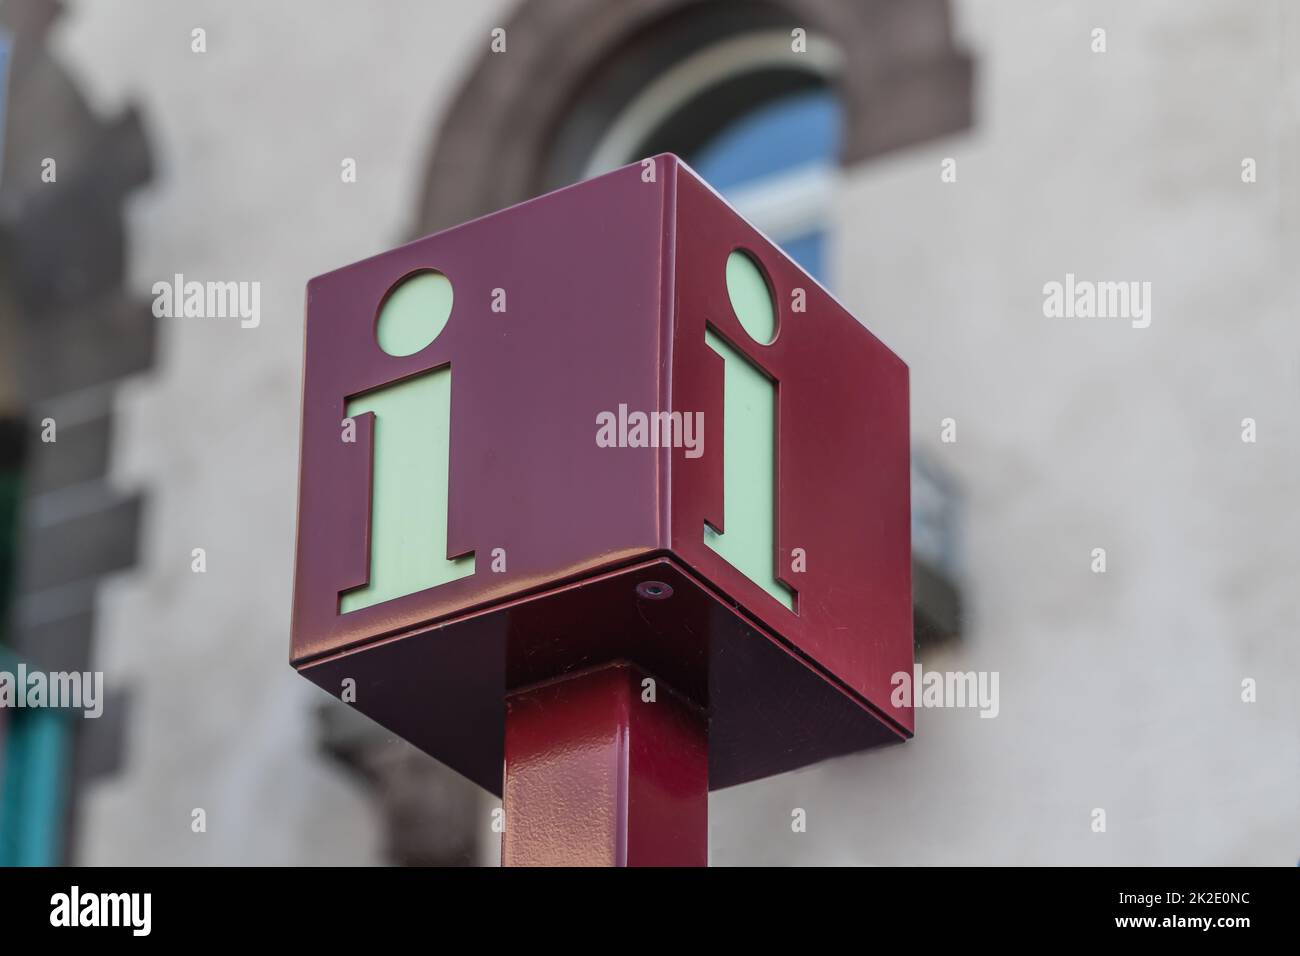 Red cube information sign helping tourist the right direction Stock Photo